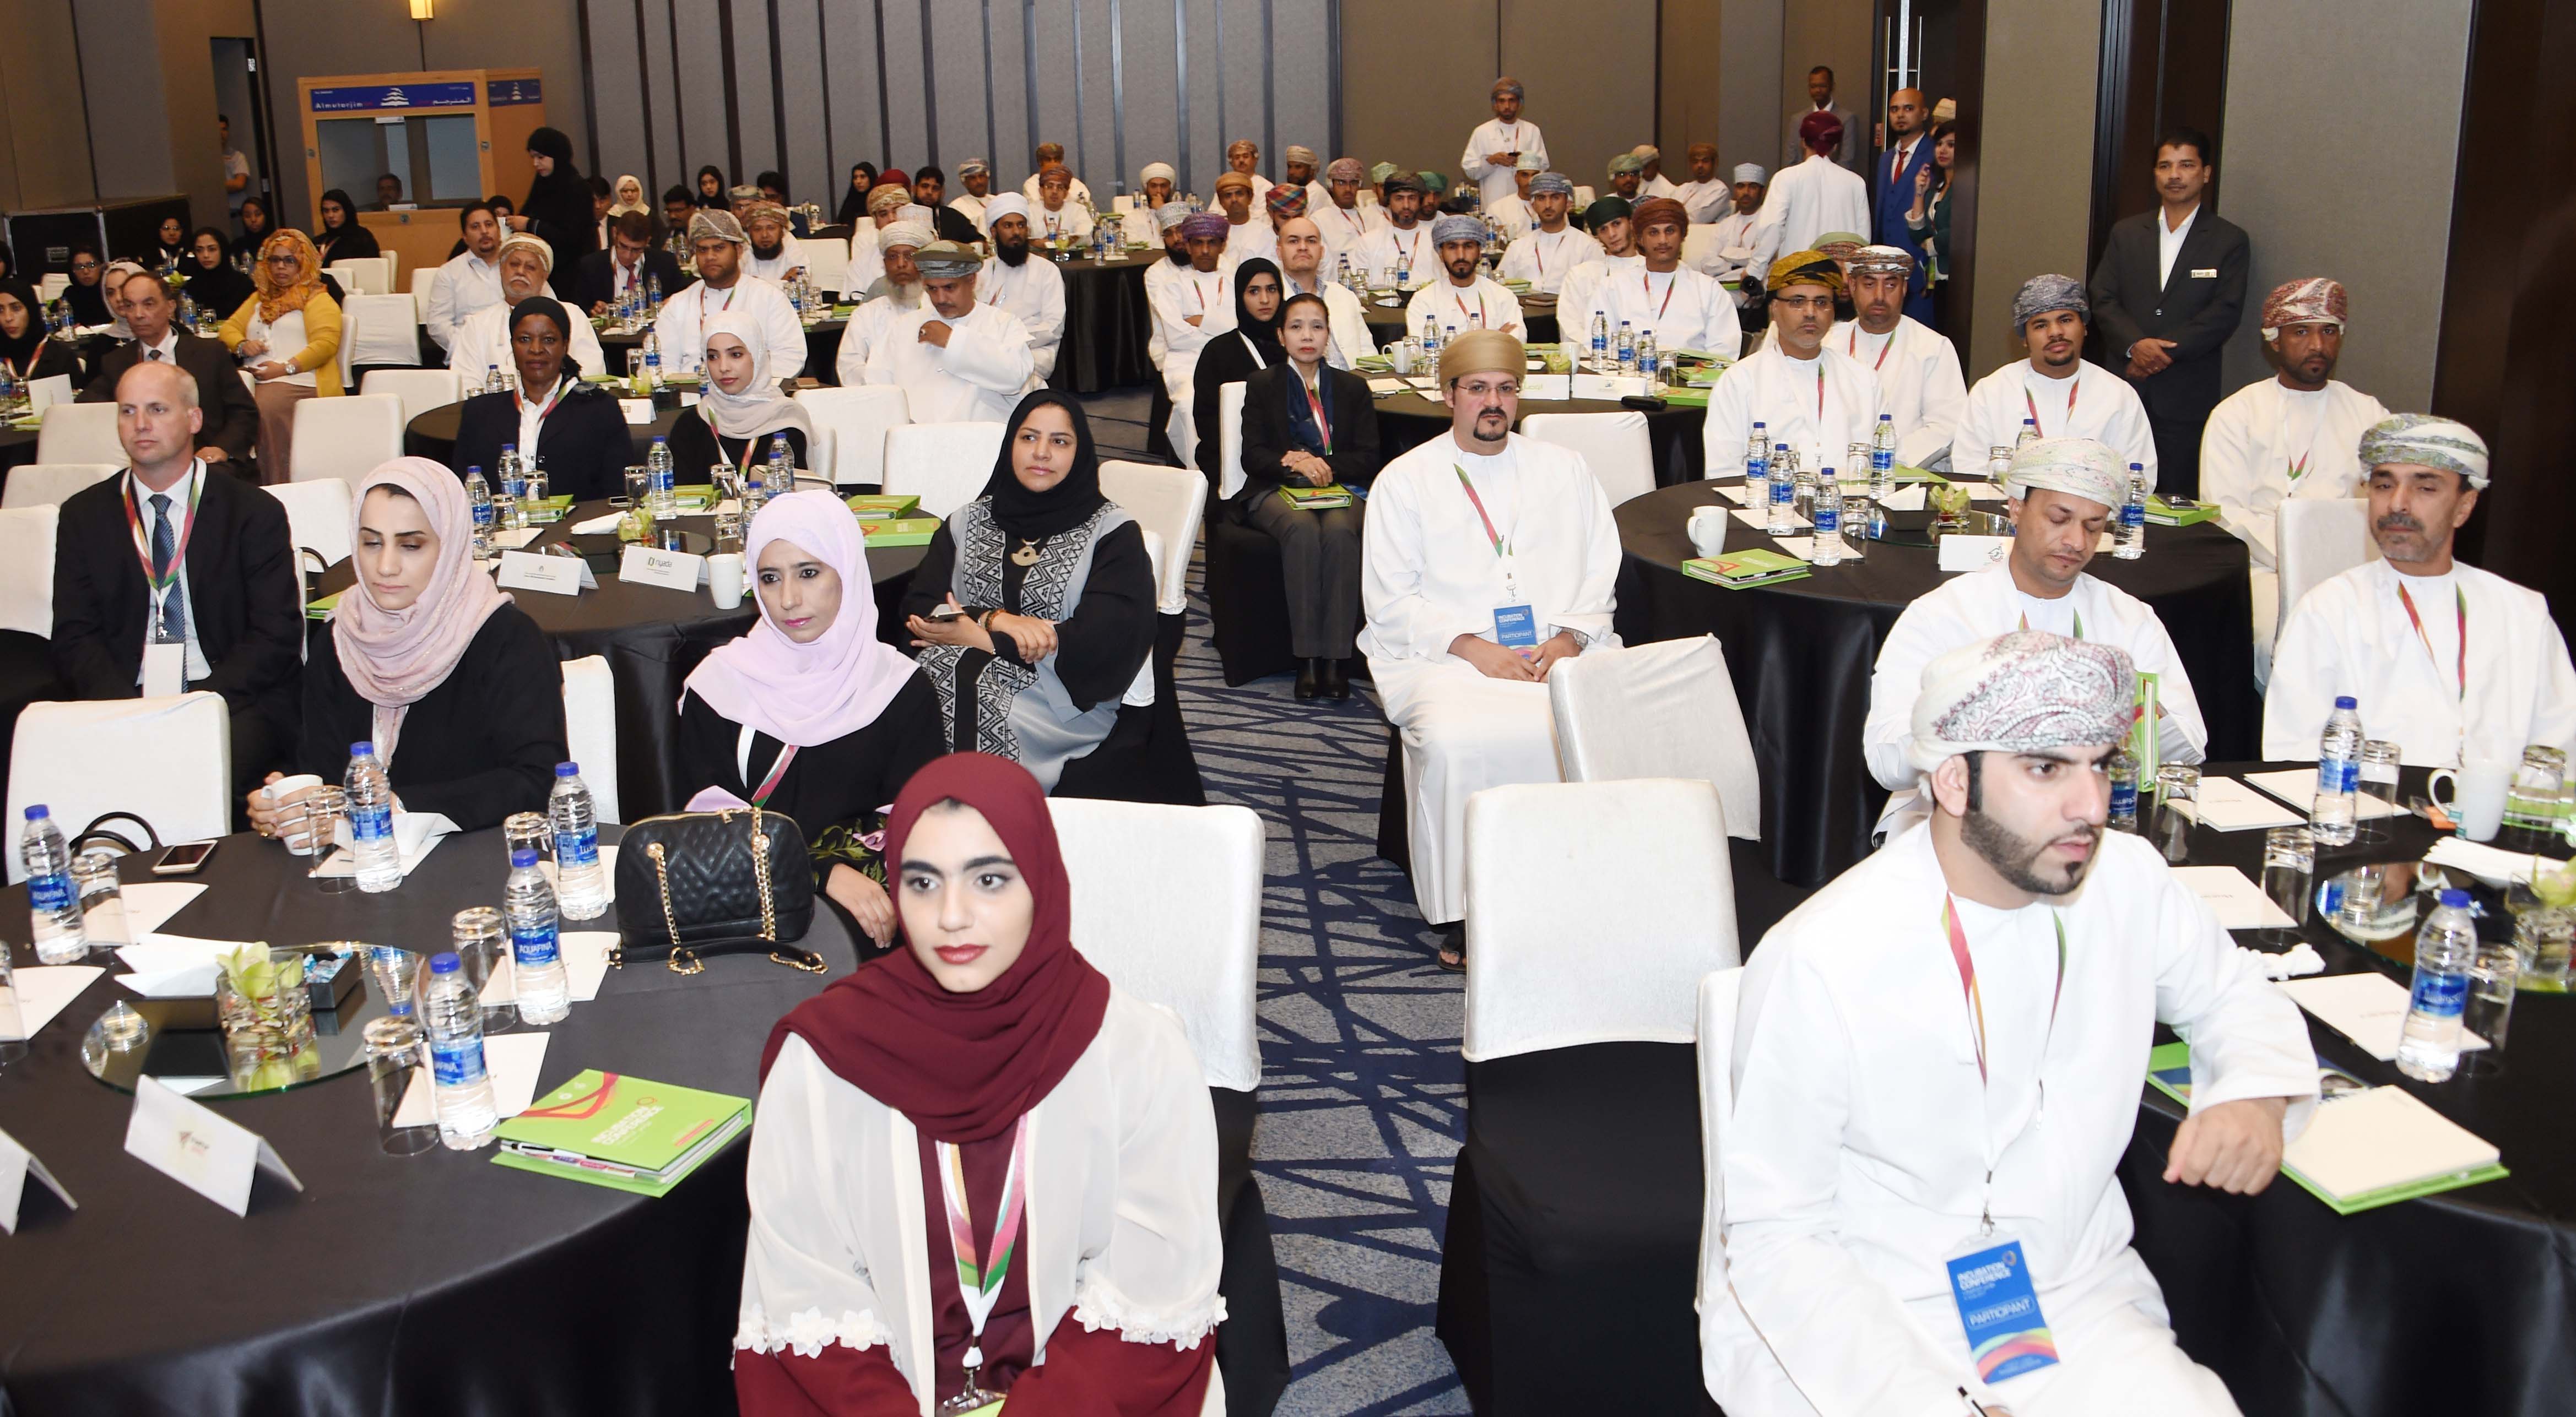 Business incubation conference concludes